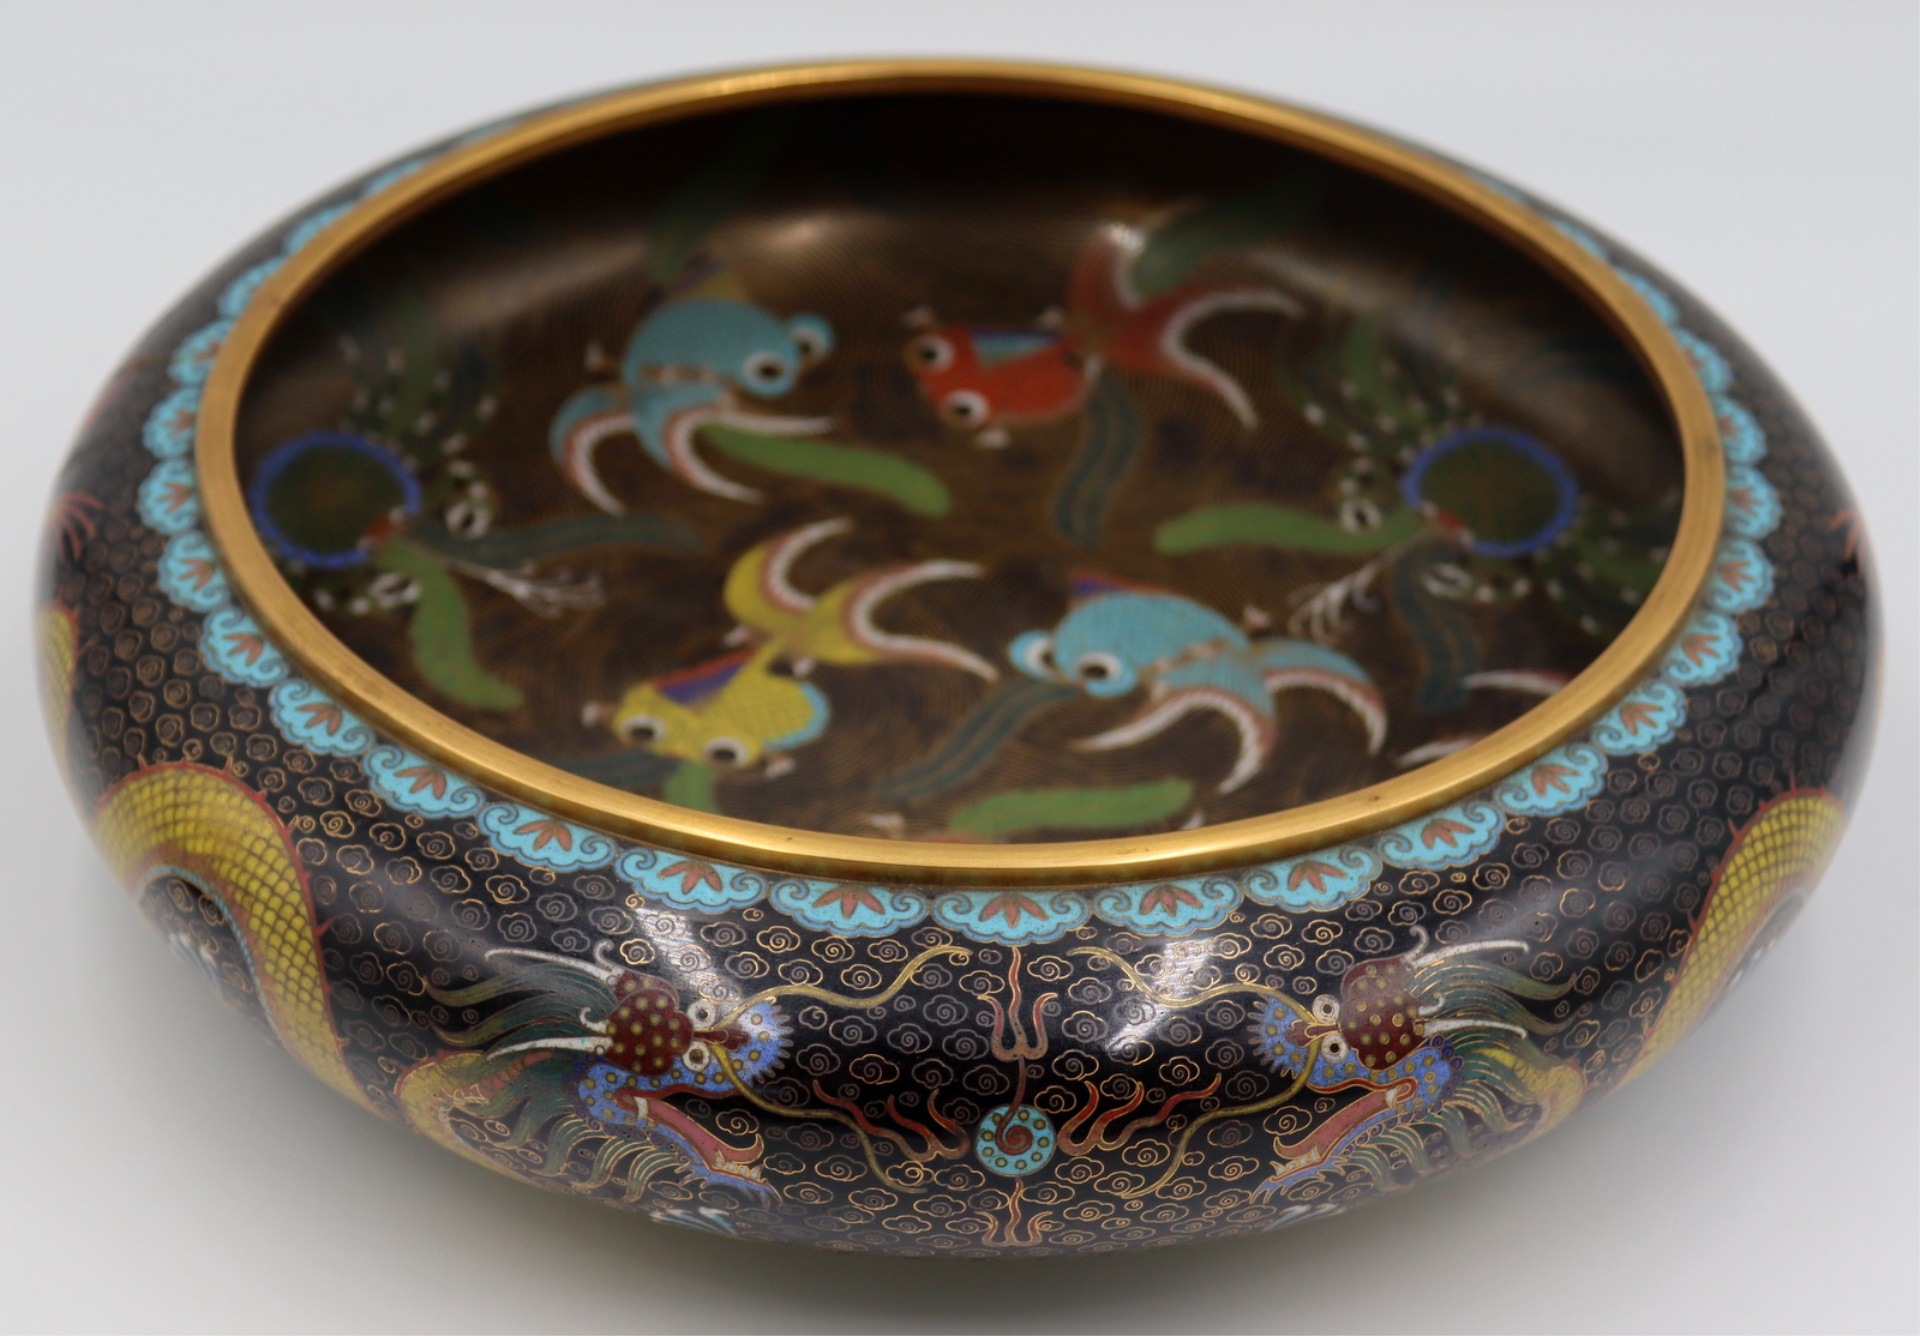 CHINESE CLOISONNE FISH BOWL. Decorated